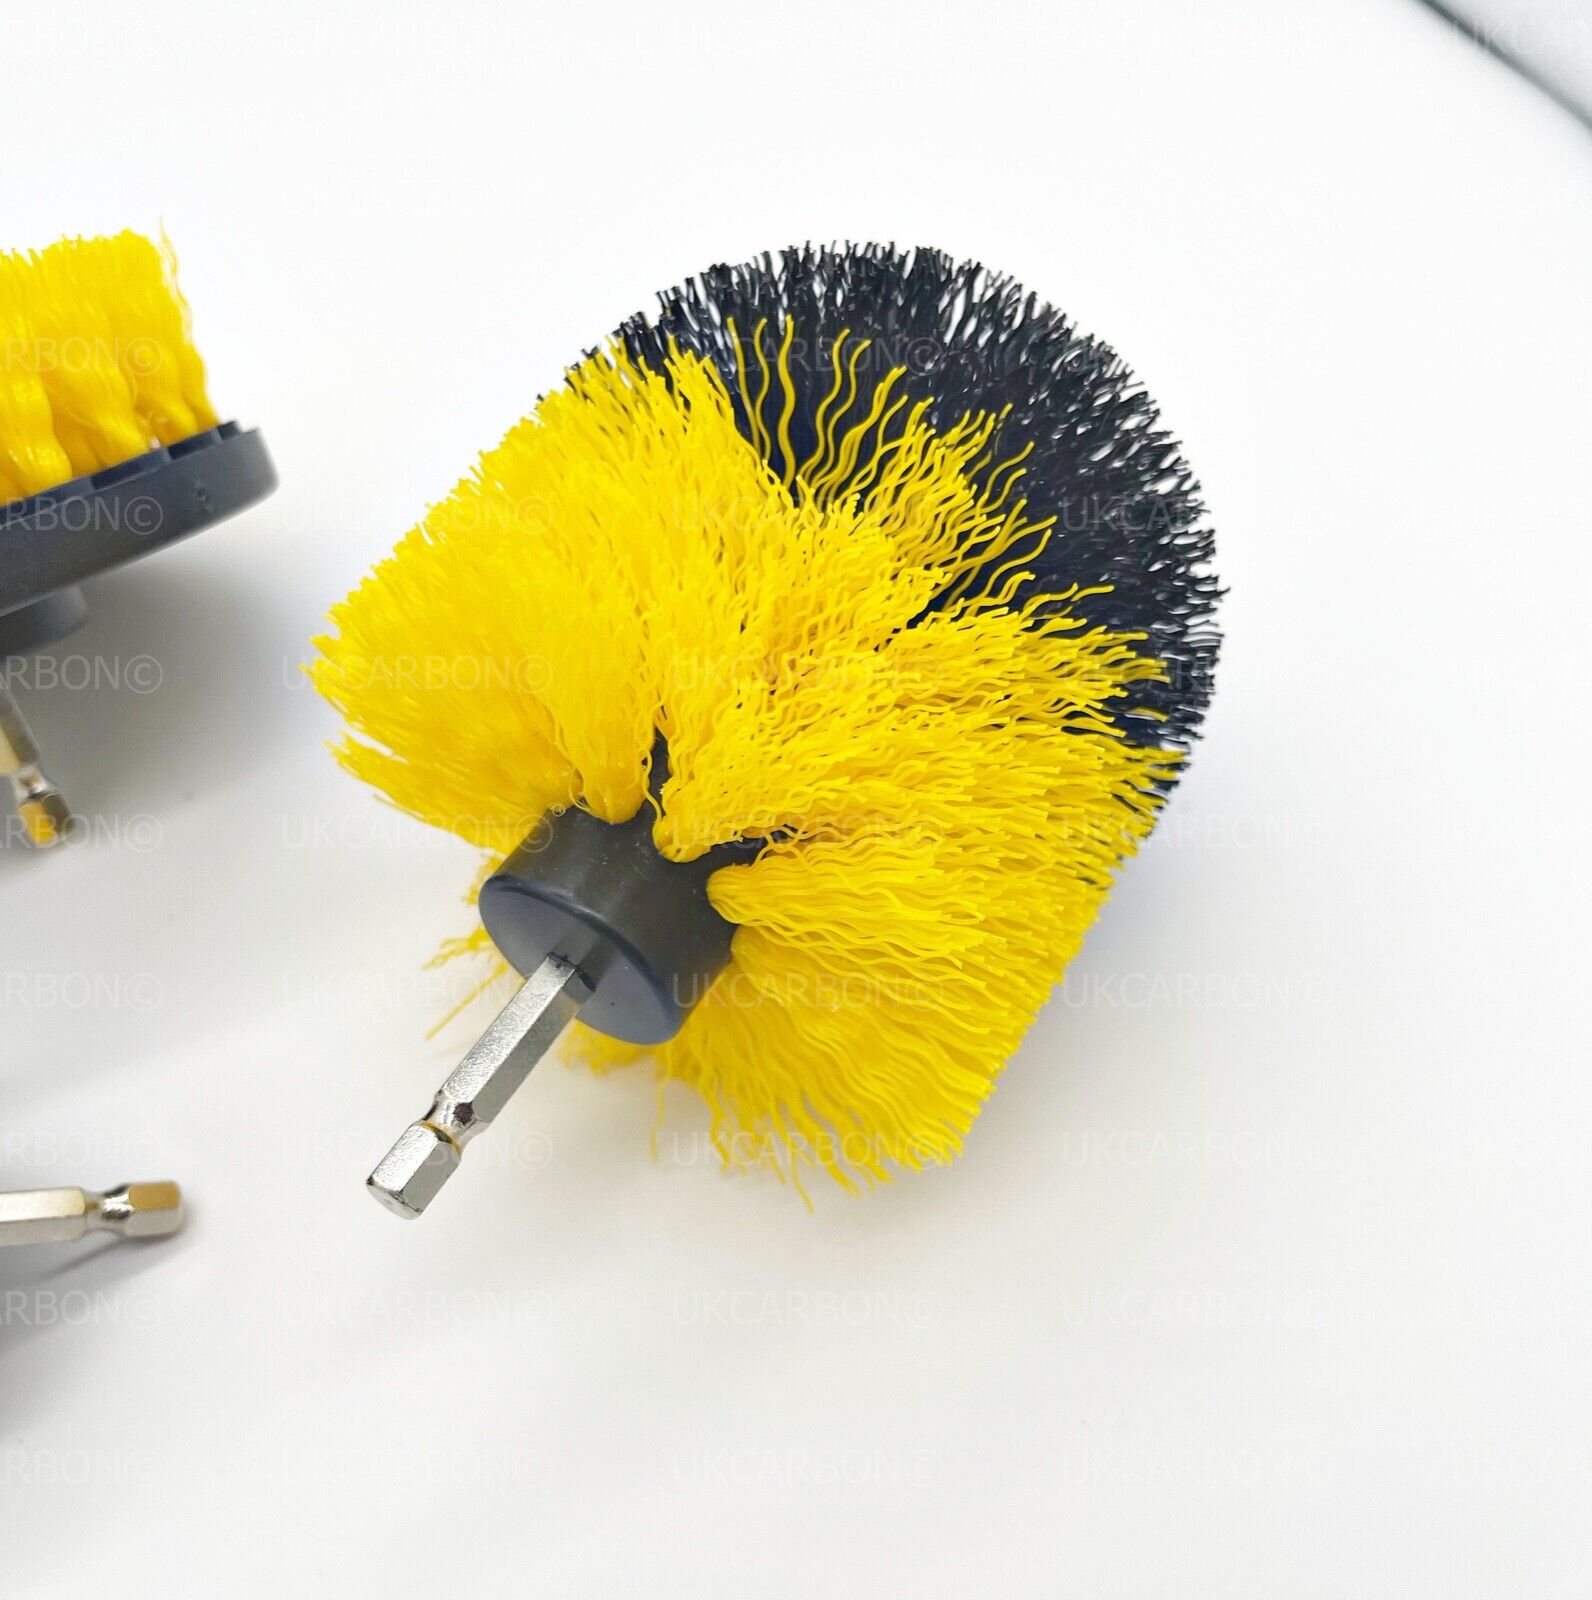 3x DRILL ATTACHMENT CLEANING BRUSH SET POWER SCRUB HOME CAR TILE BATHROOM YELLOW - UKCarbon